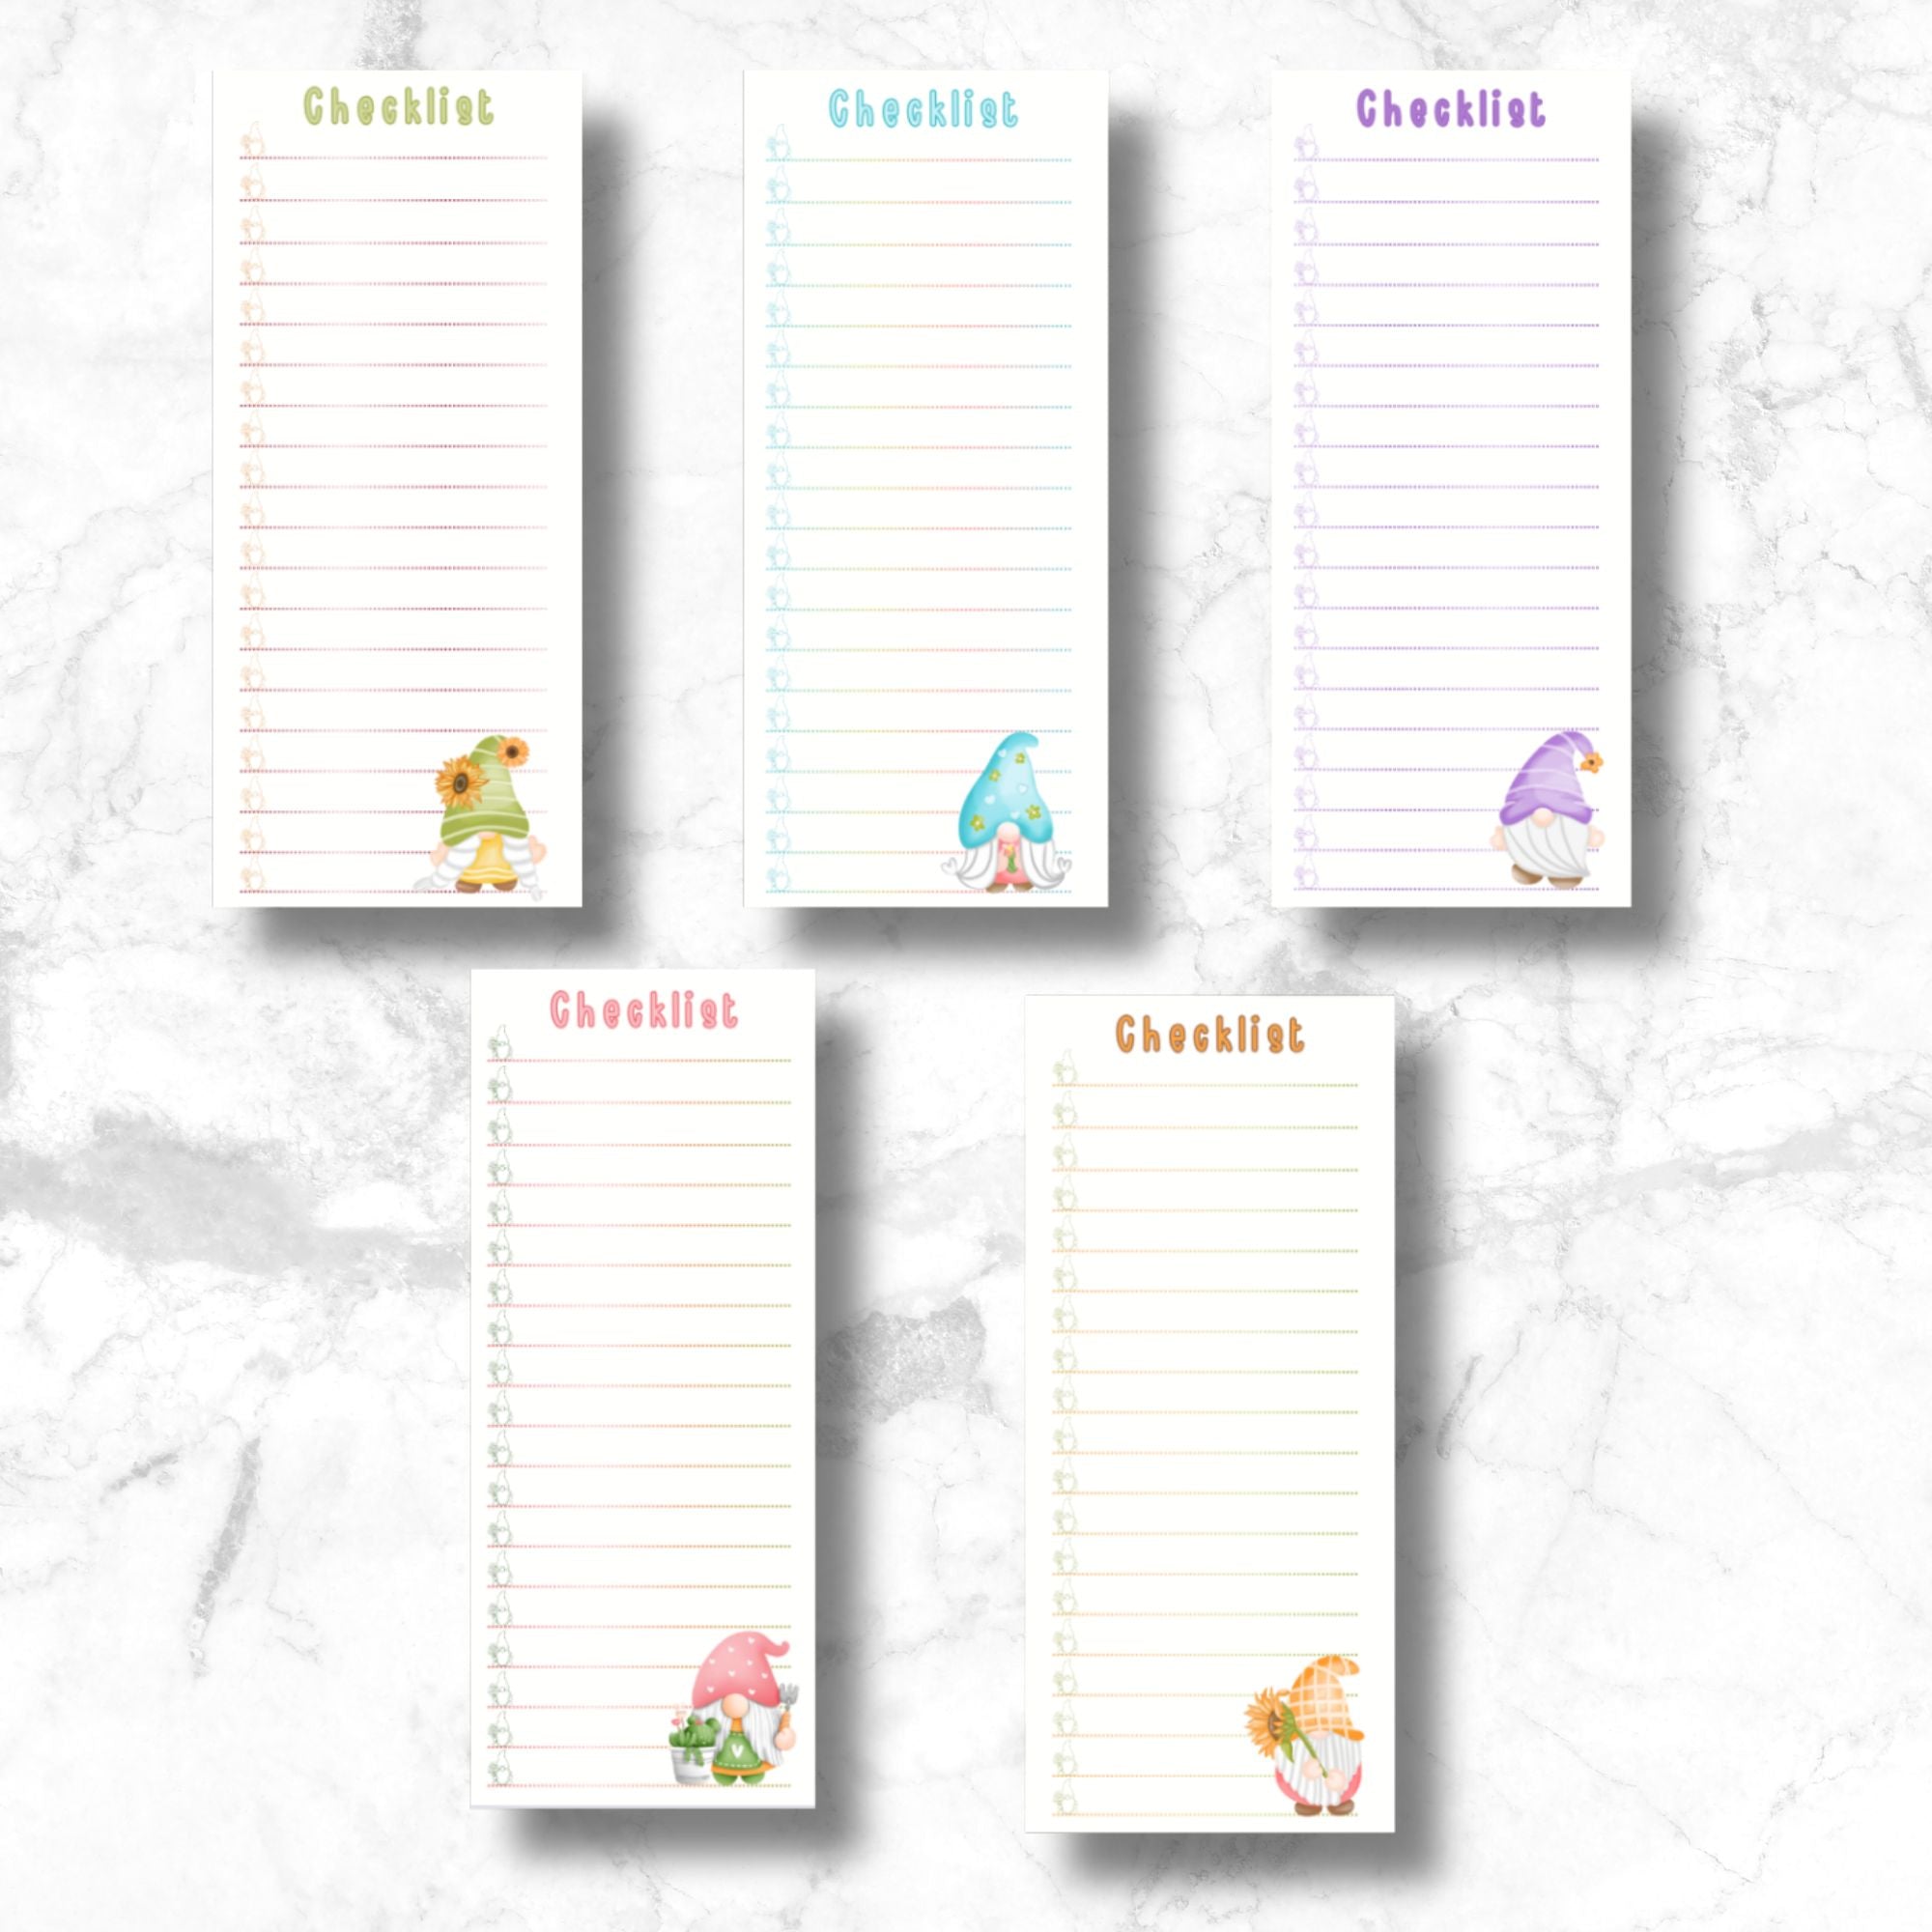 This image shows the 5 different designs included in the Checklist Notepad - Gnomes.